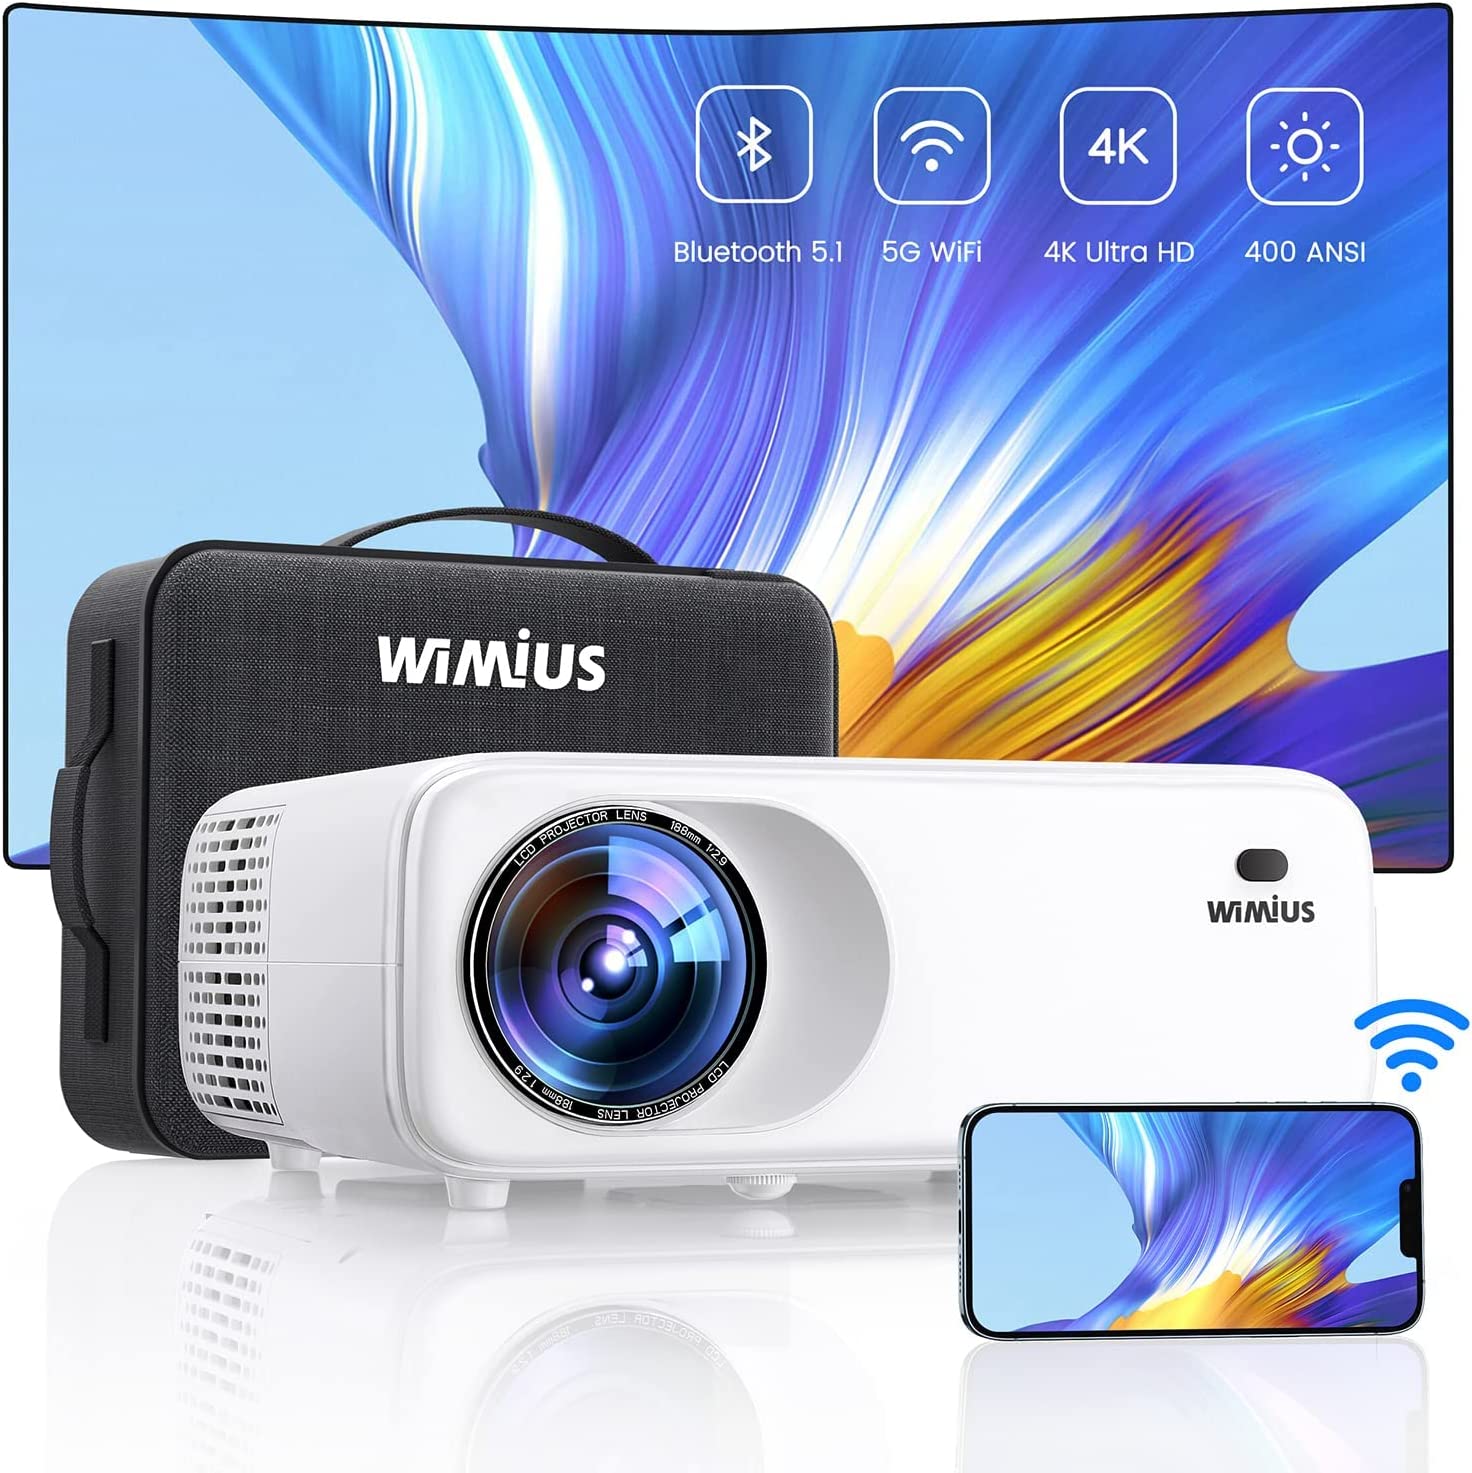 WiMiUS W6 Review, Pros & Cons - 1080P 5G WiFi Bluetooth Projector